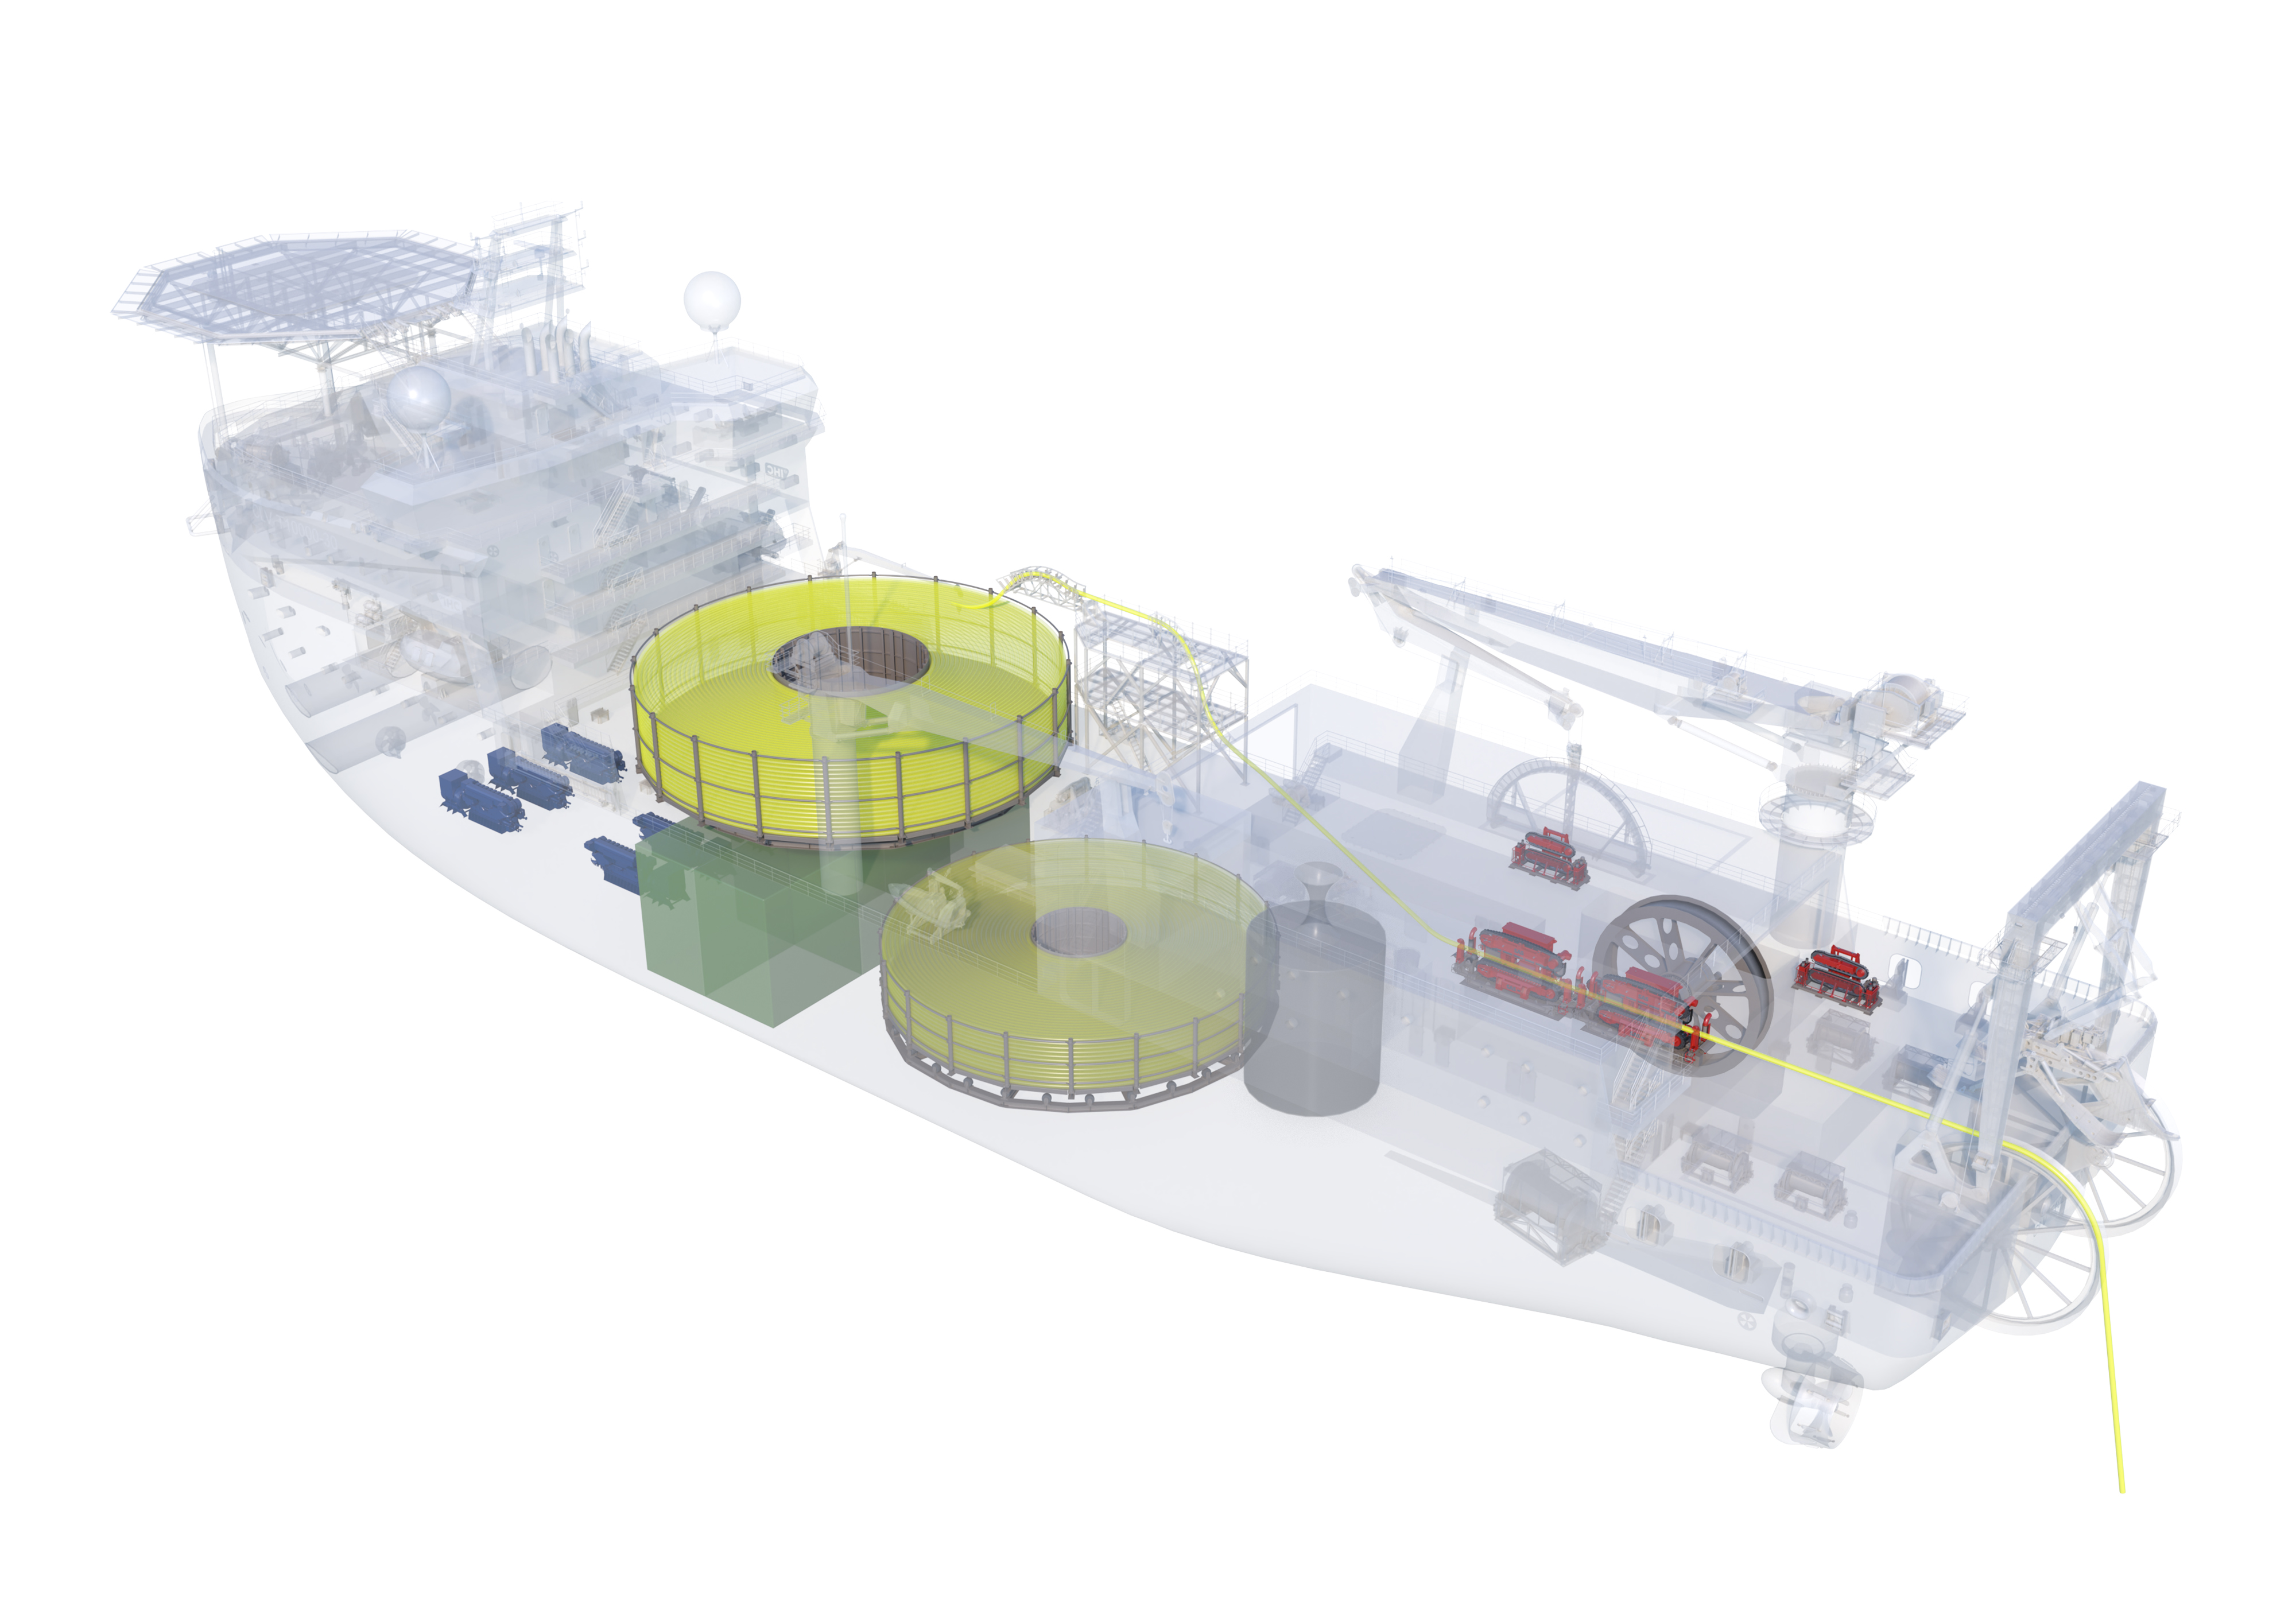 transparent view of export cable lay vessel showing equipment lay out